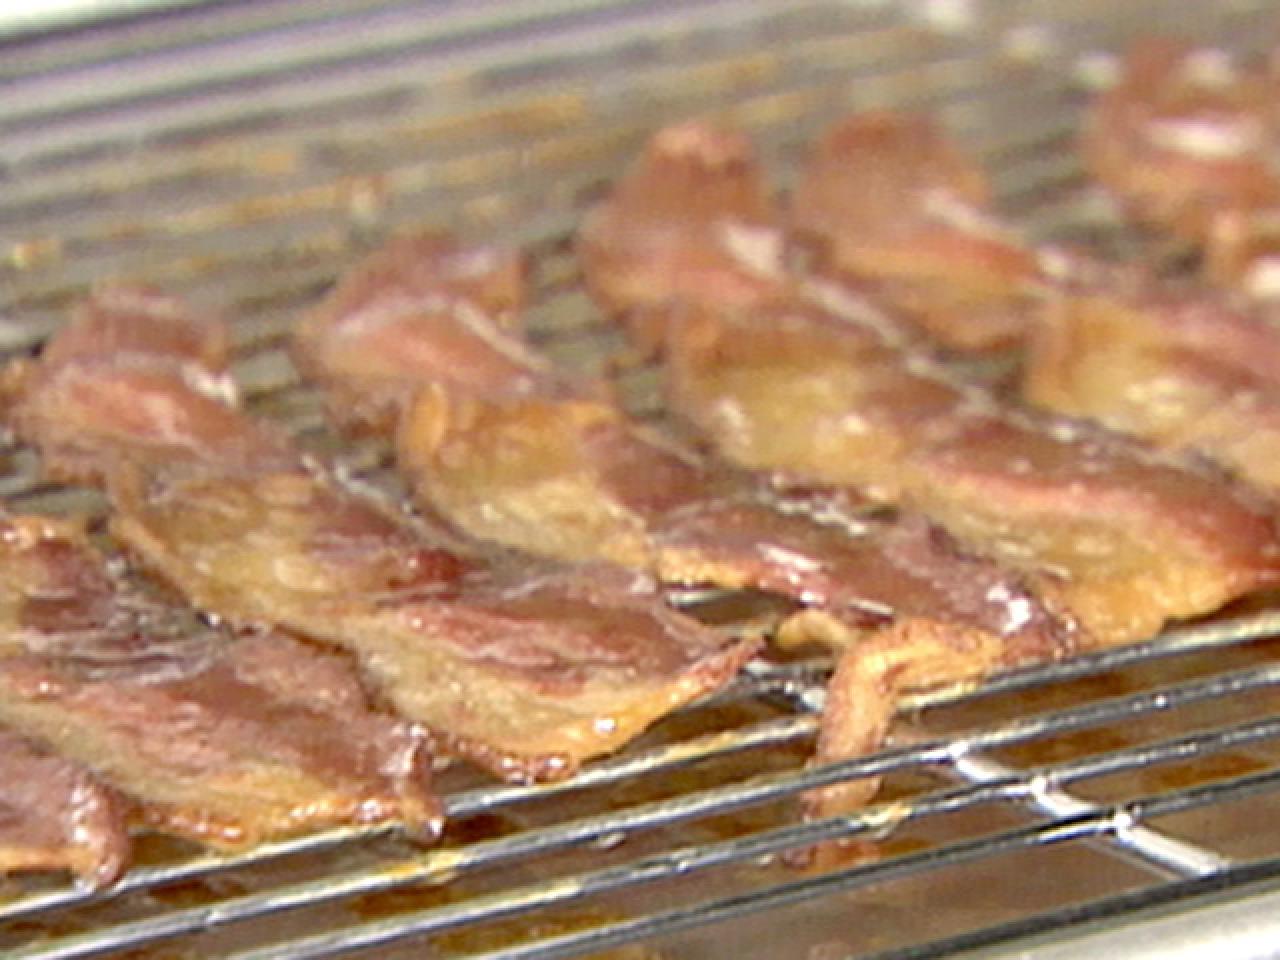 Maple-Roasted Bacon  For the Love of Cooking